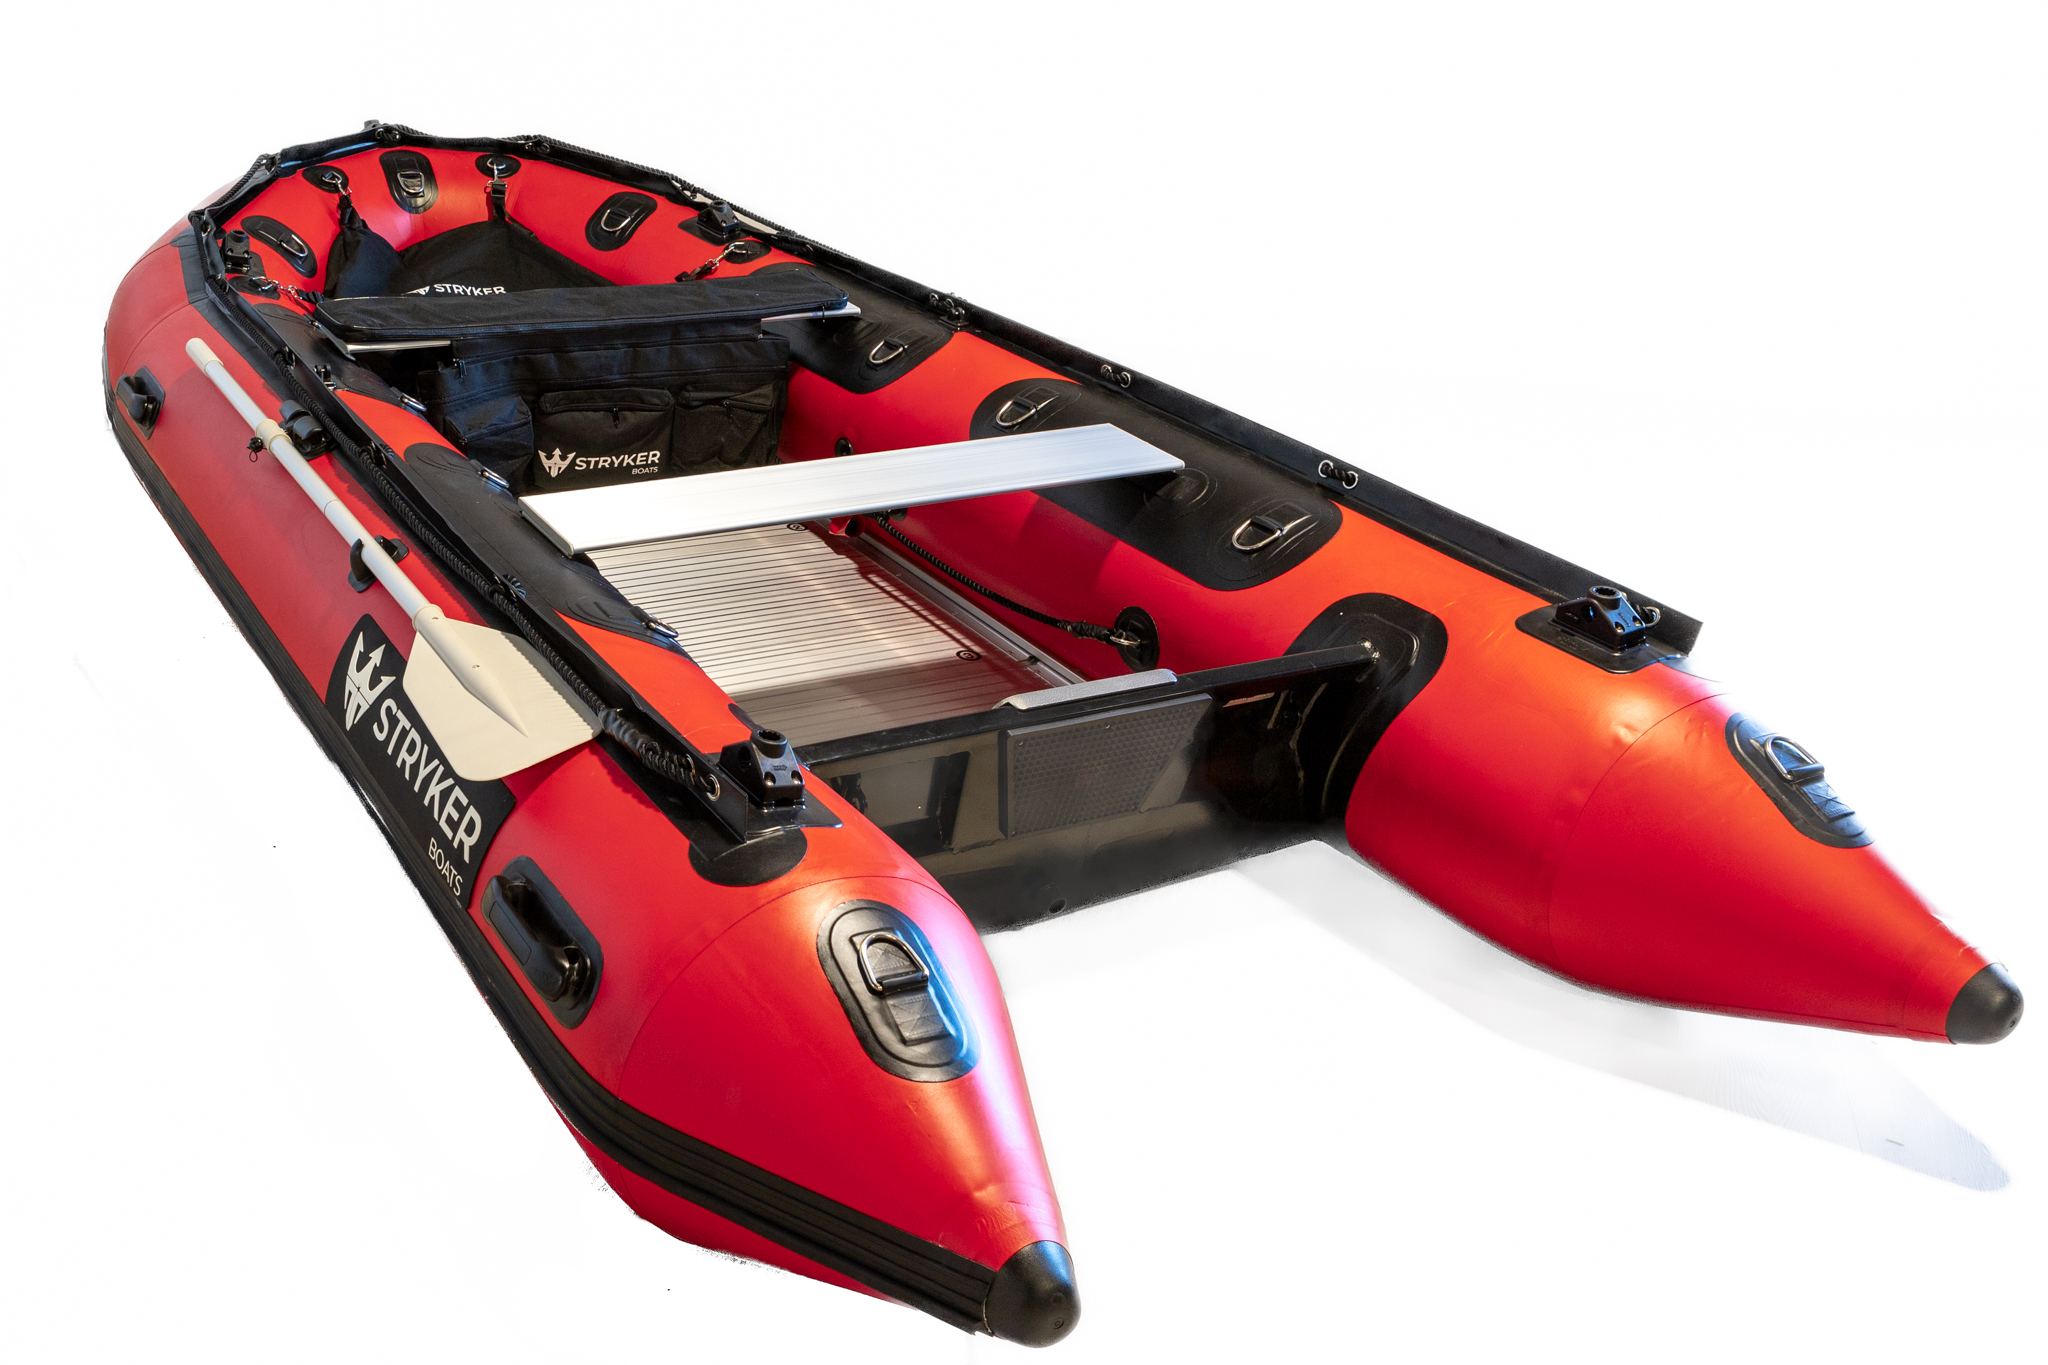 Stryker LX 380 (12' 5”) Inflatable Boat